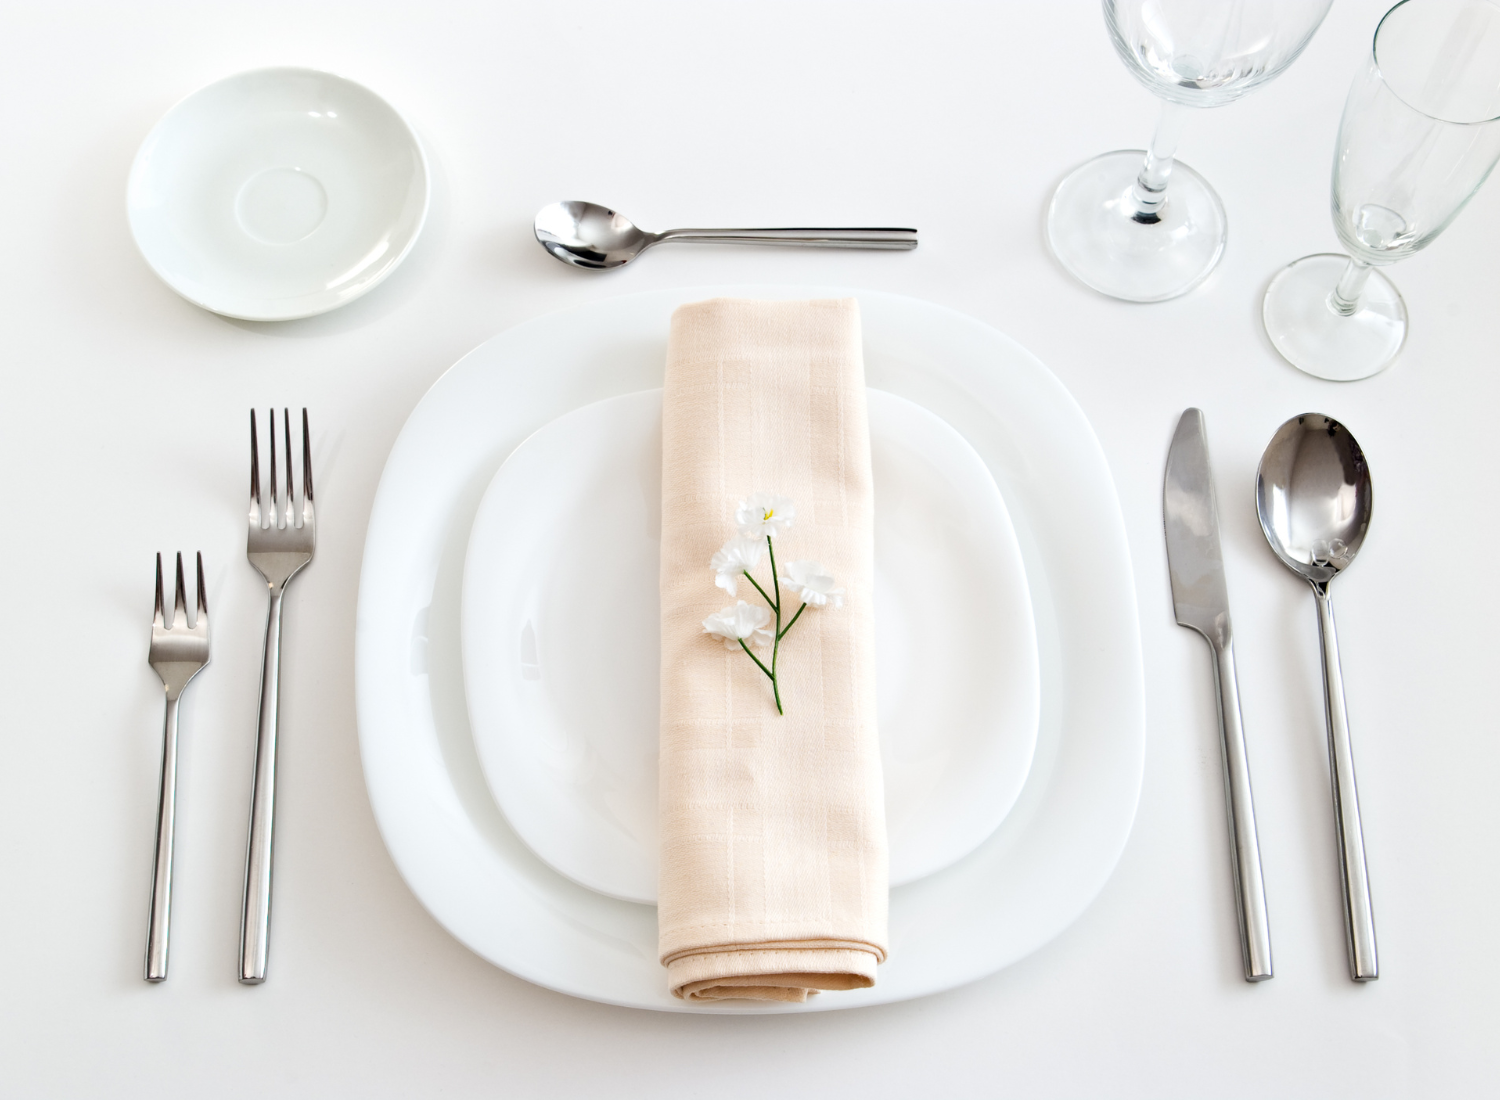 Stock image of a place setting.